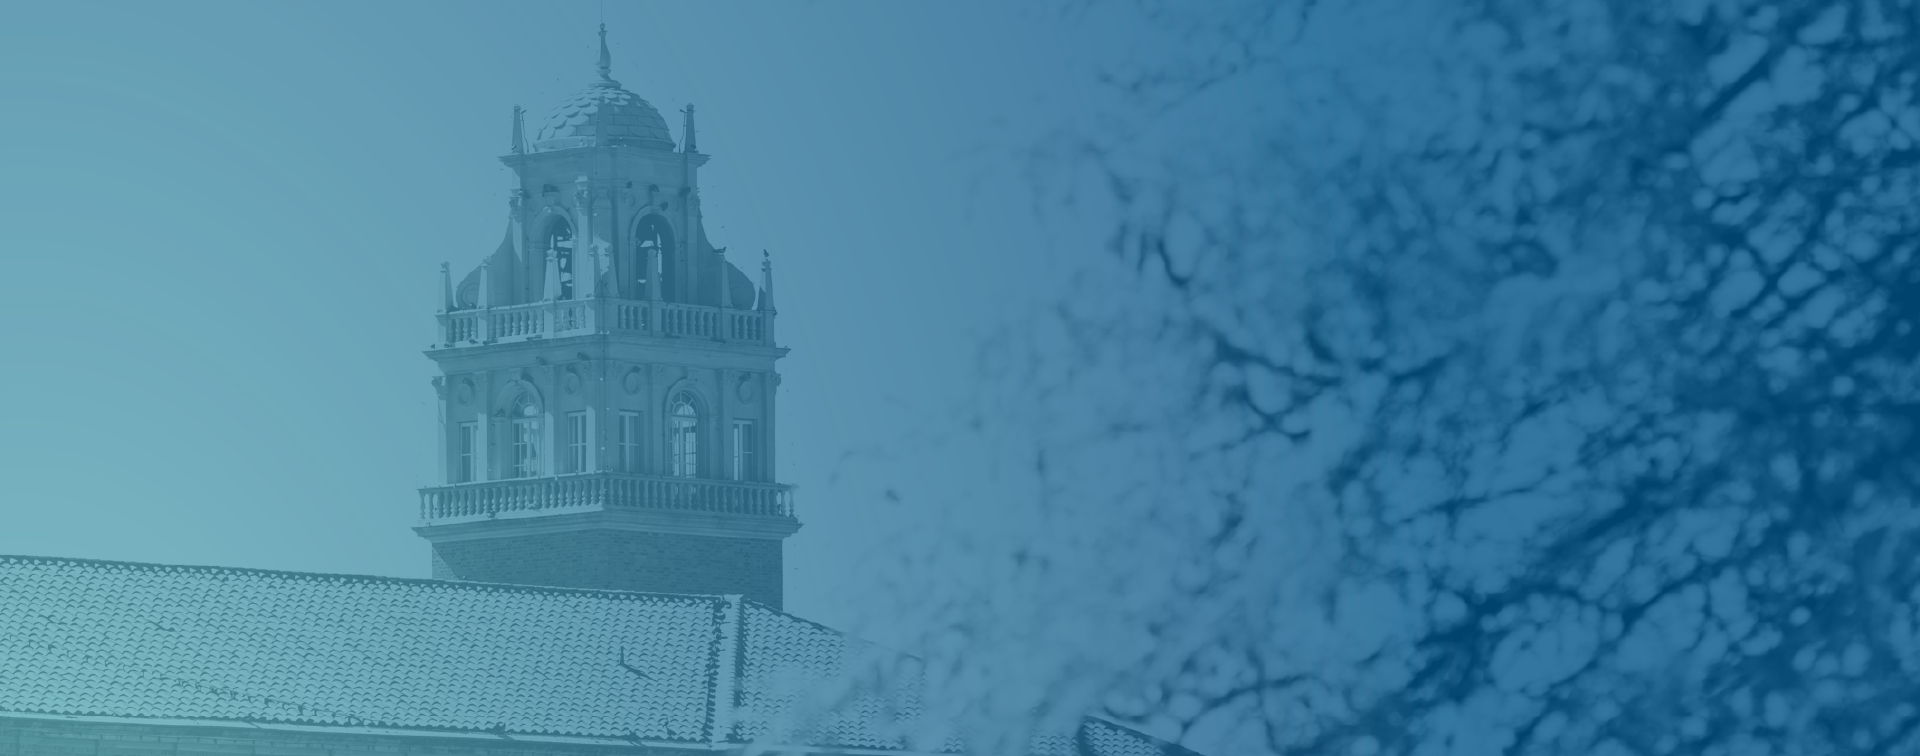 Blue-tint photo illustration of an ornate university building tower 